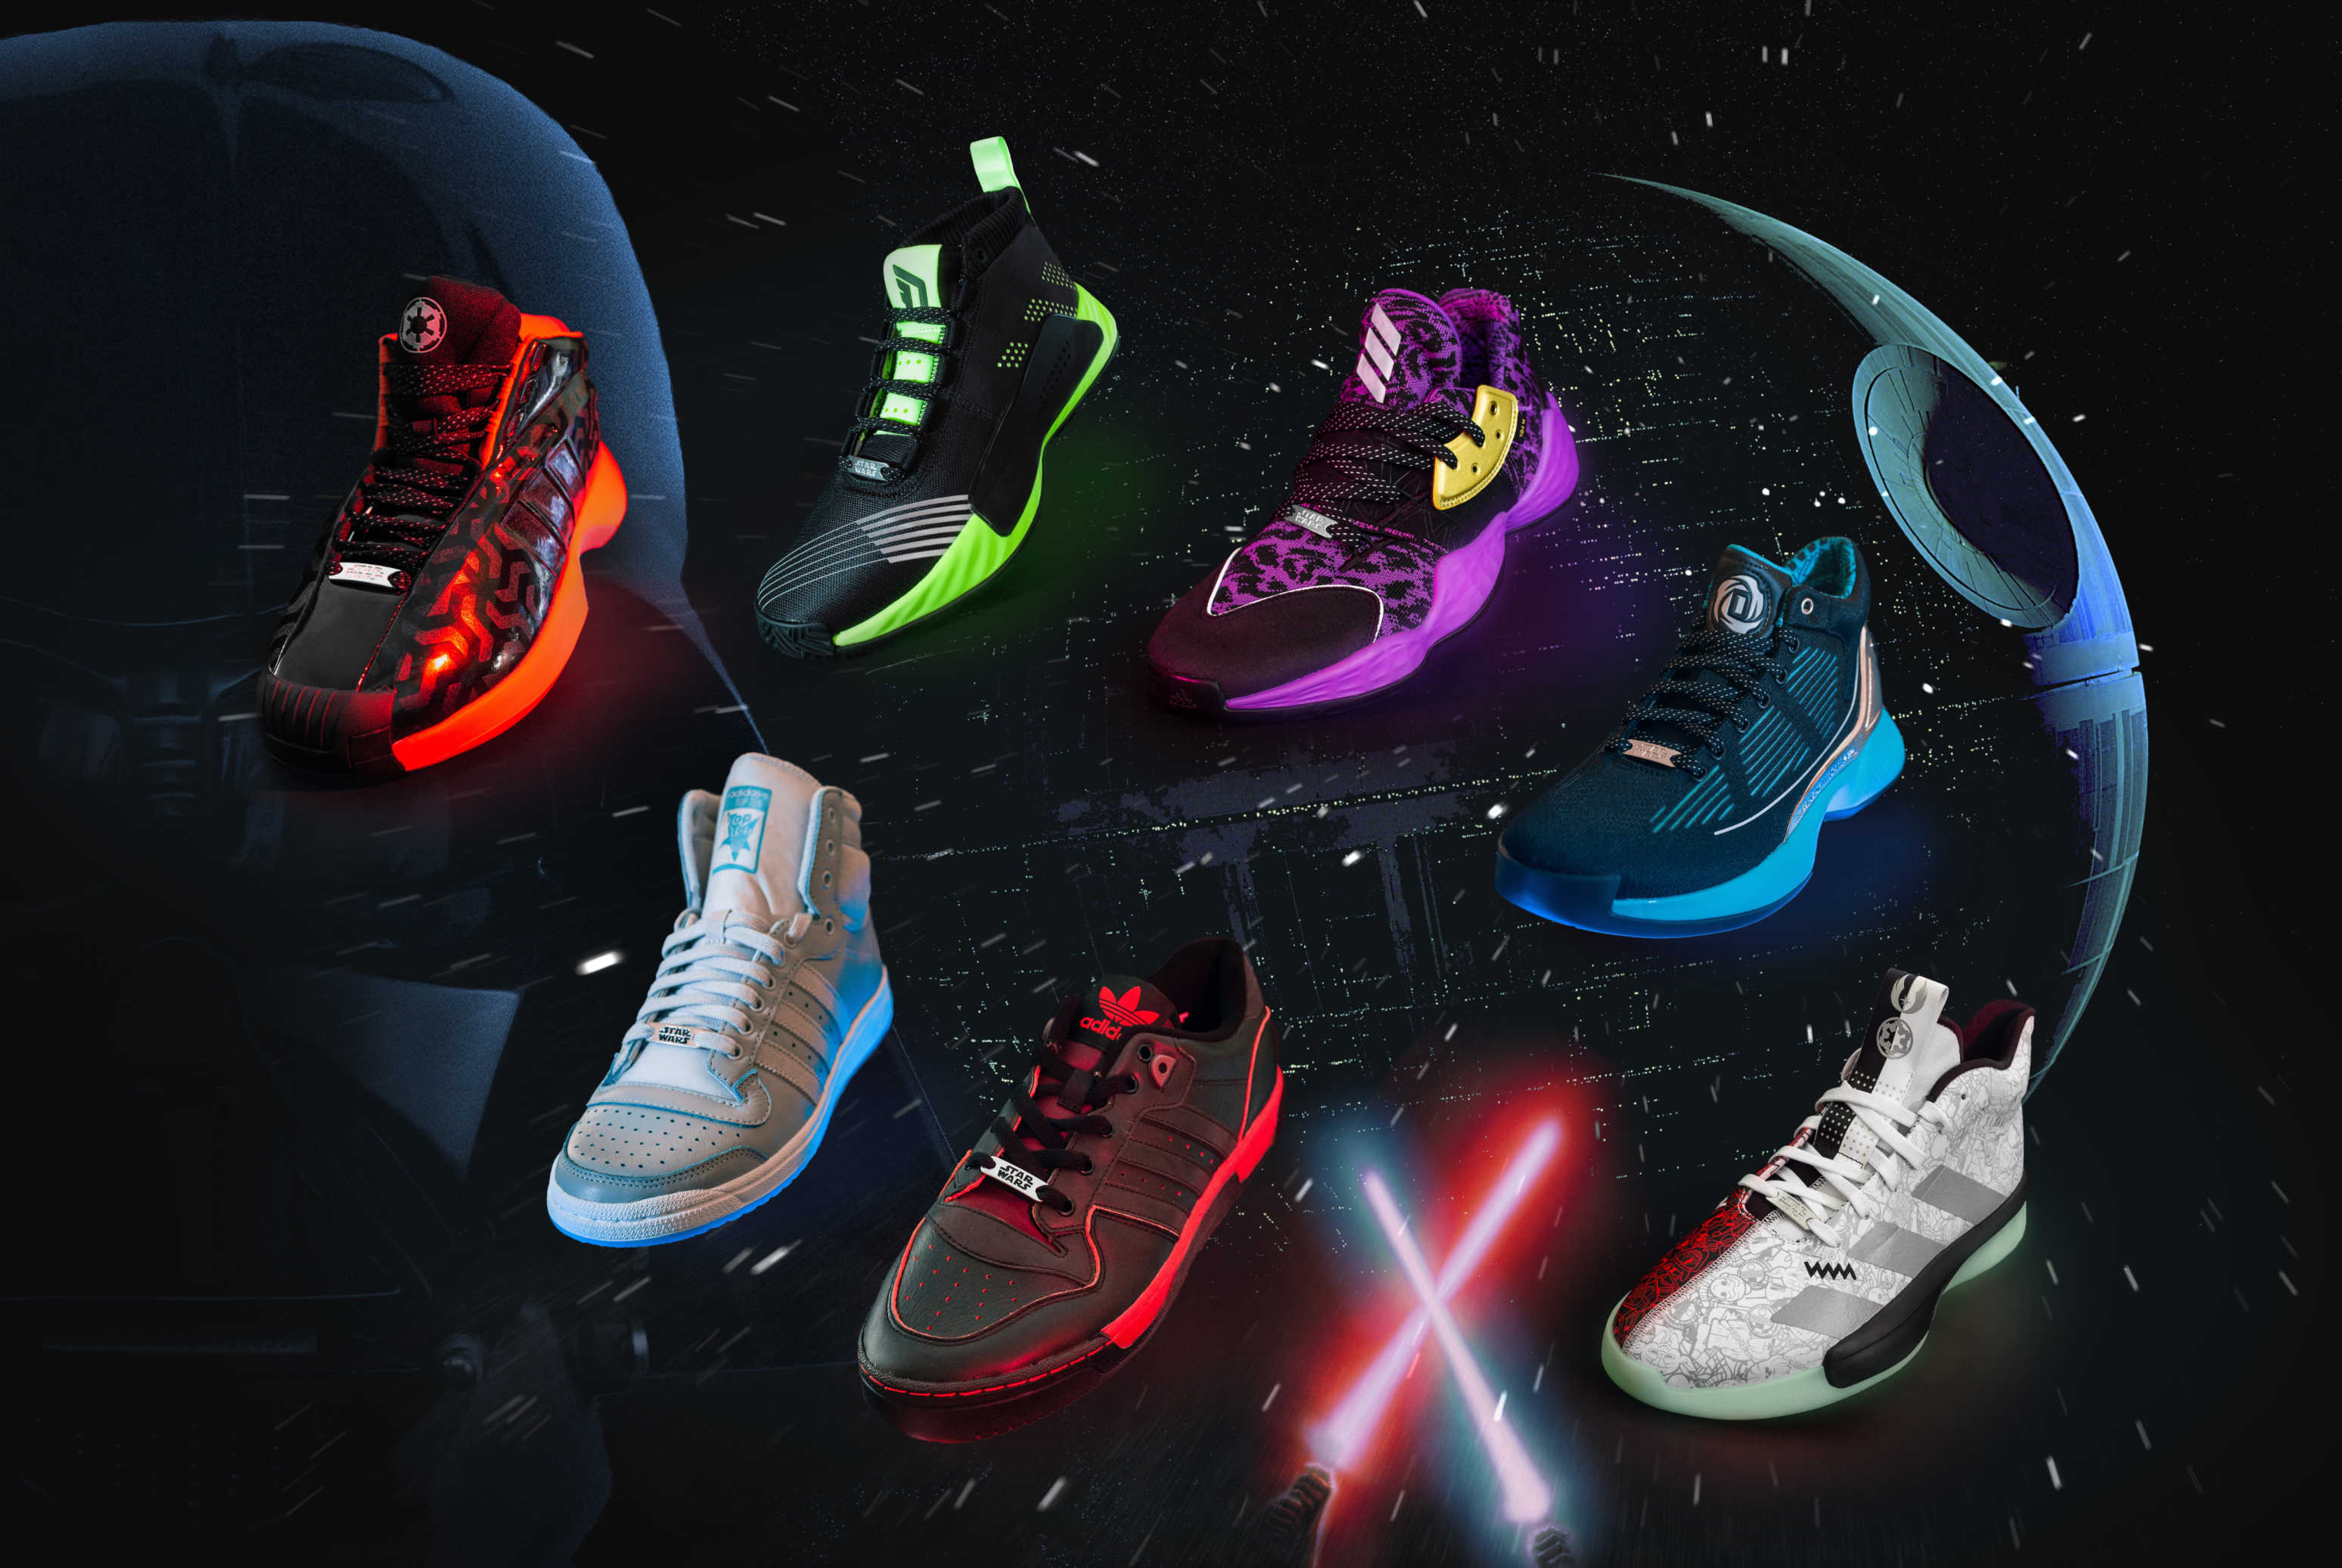 Adidas Star Wars Sneaker Collection Is Now Available Linda M. Grant